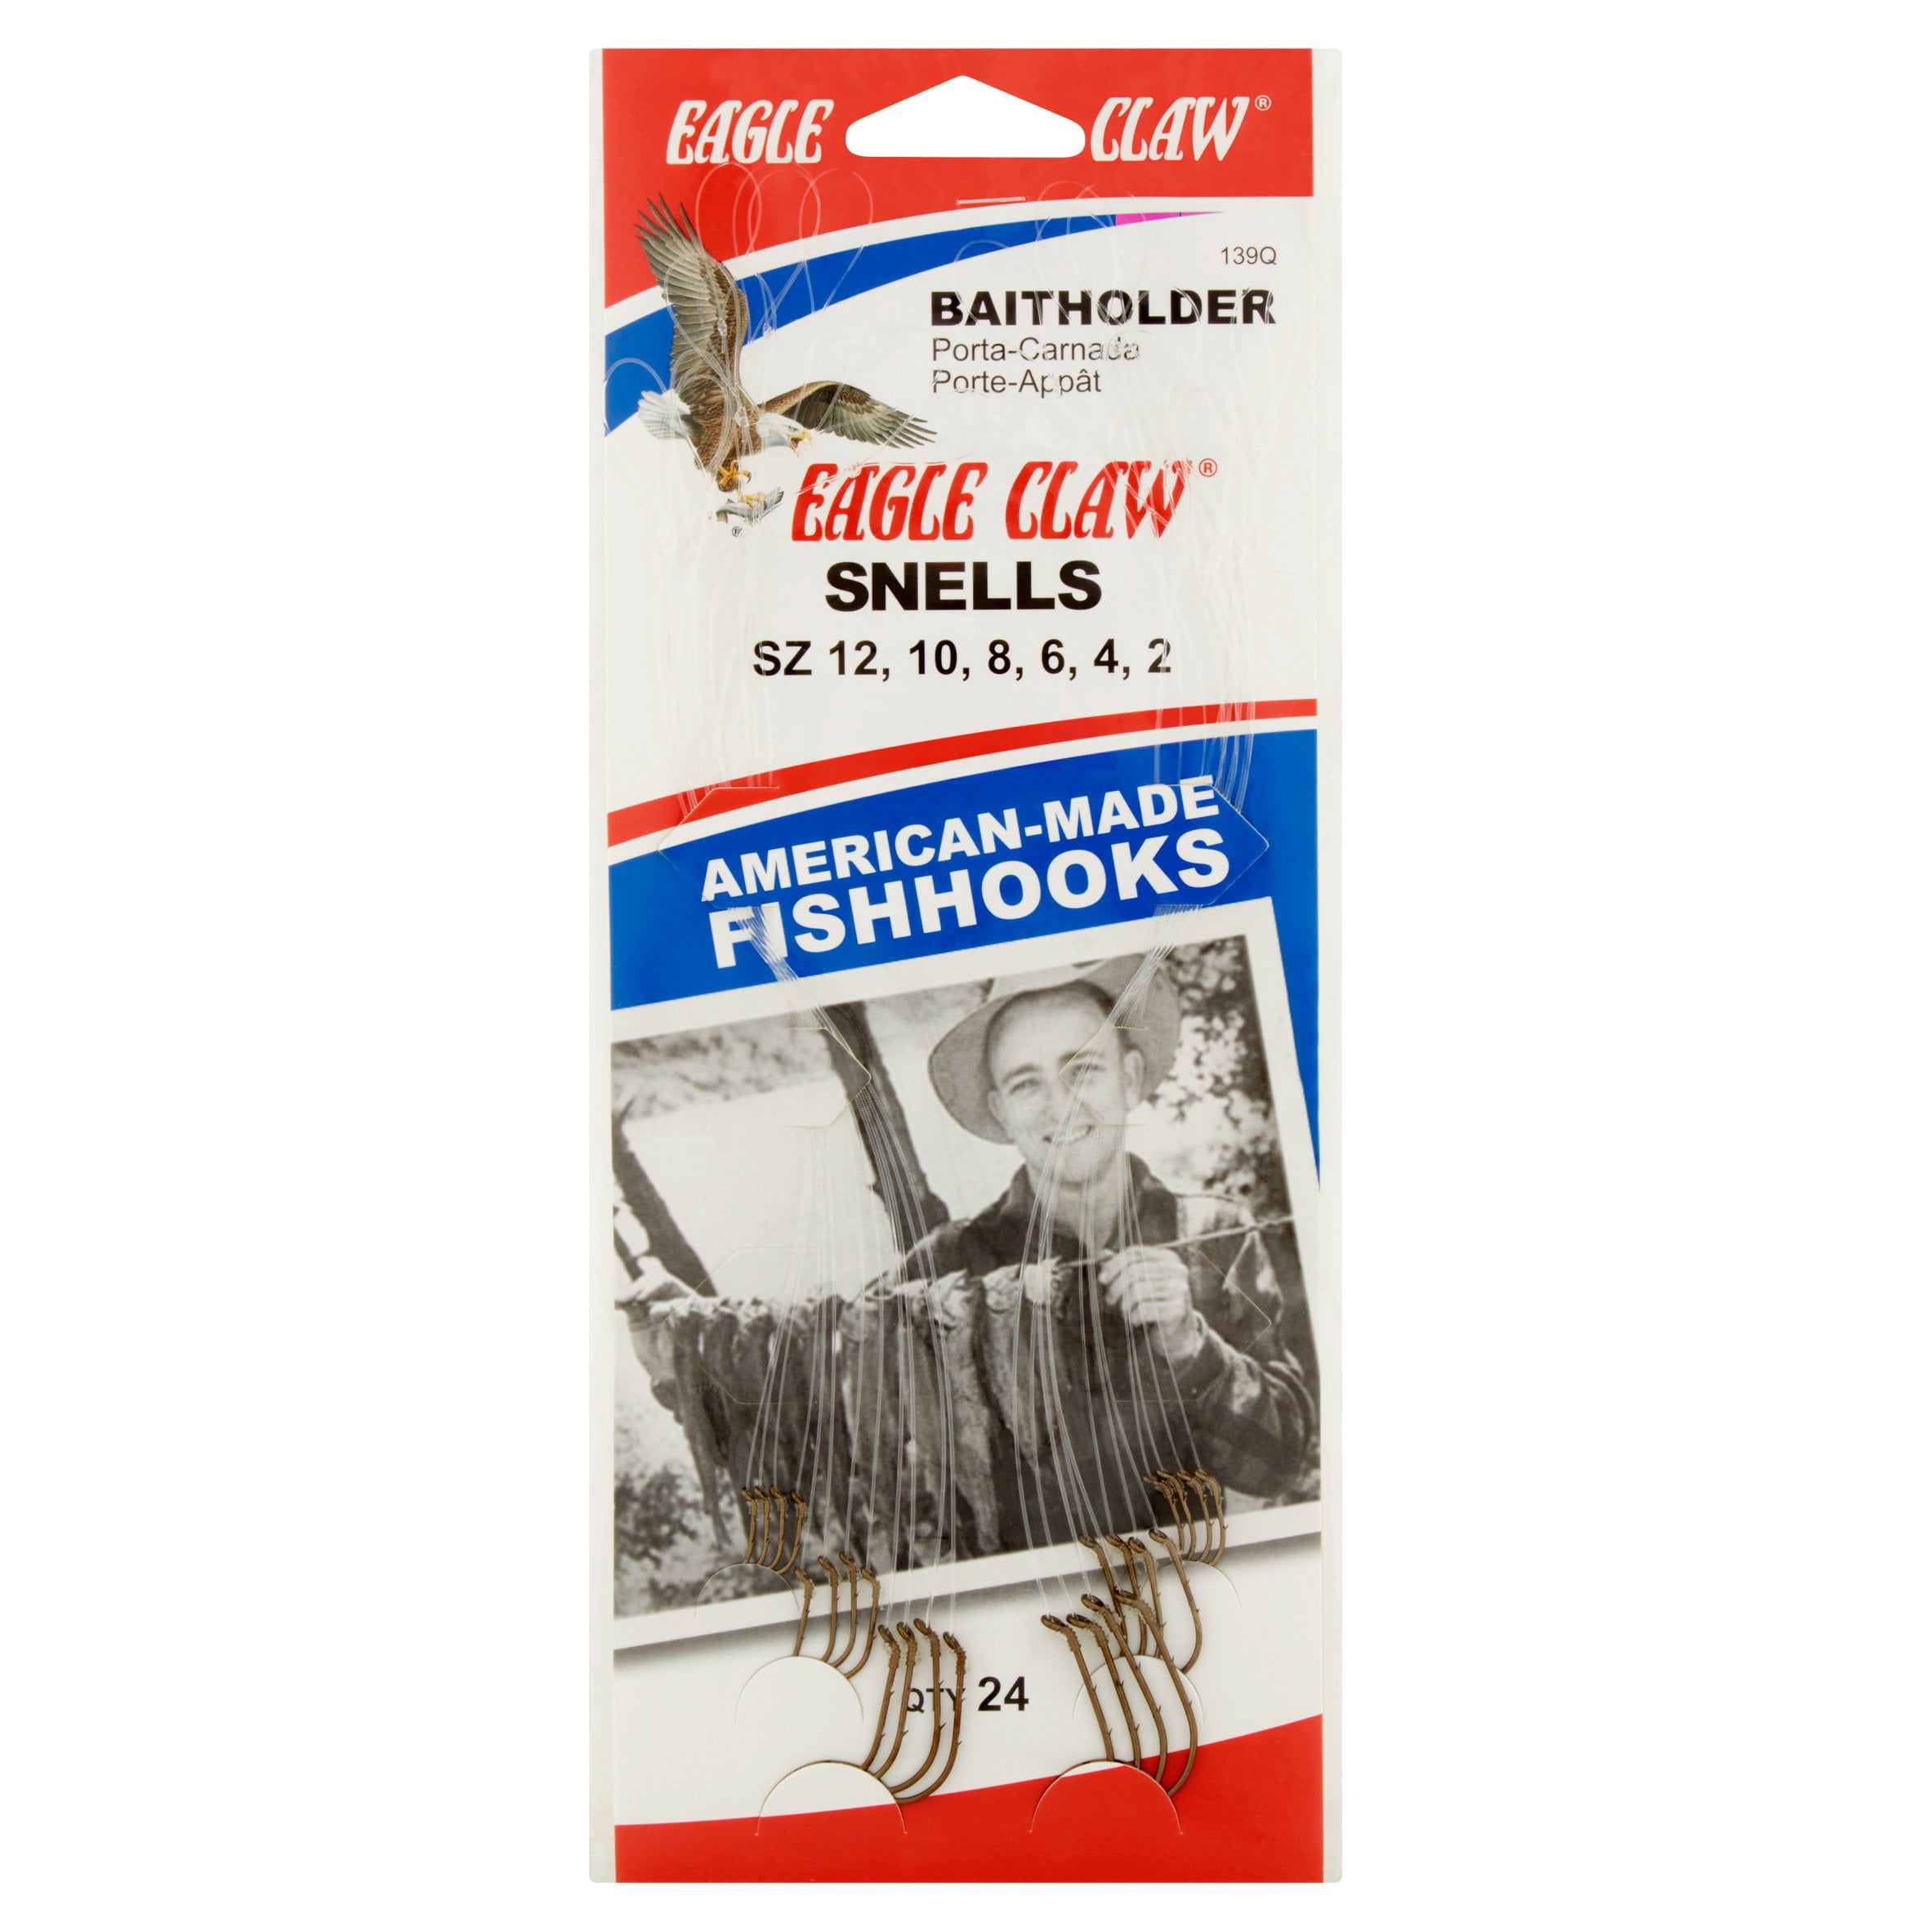 Blood Red Size 4 FOUR Packs of 6 = 24 Total #222R-4 Eagle Claw Snelled Hooks 